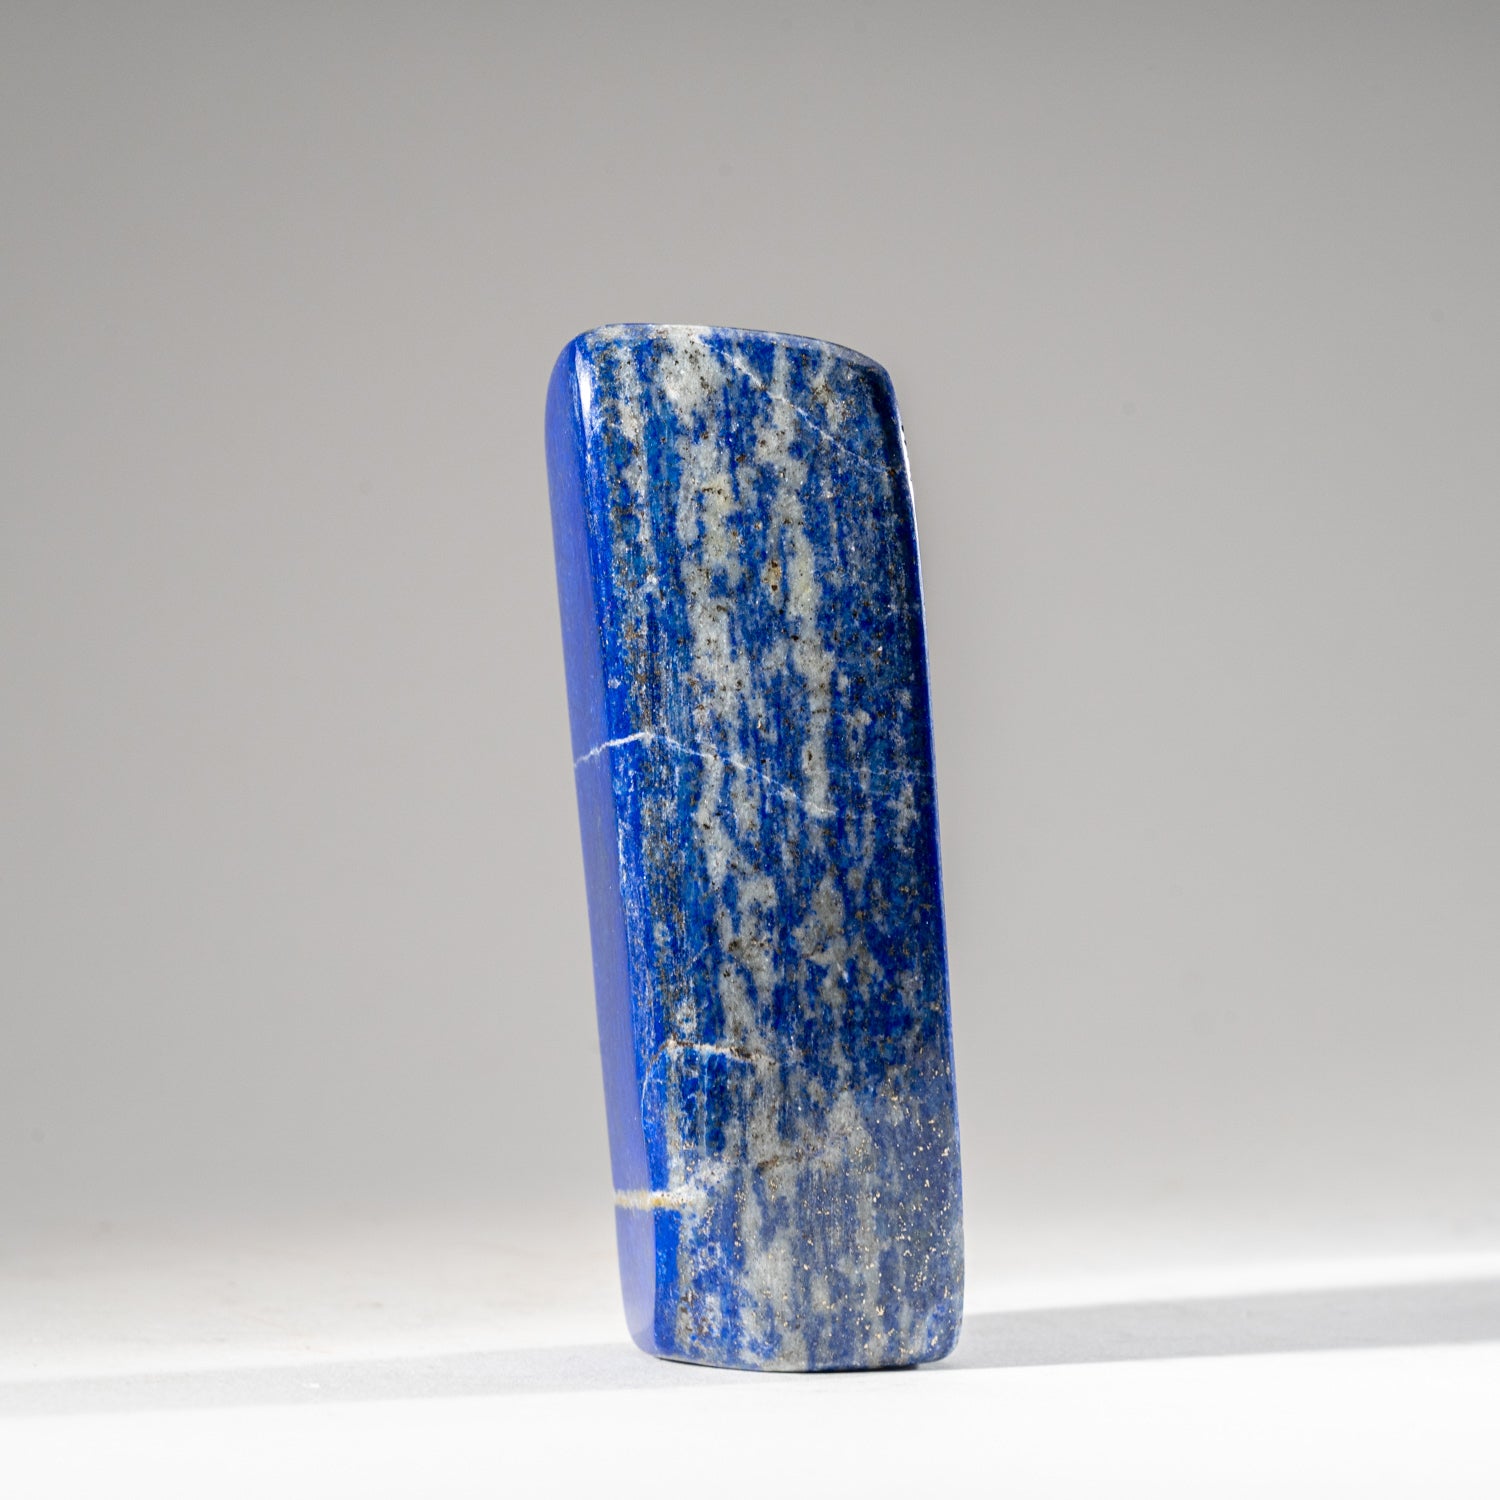 Polished Lapis Lazuli Freeform from Afghanistan (258.8 grams)